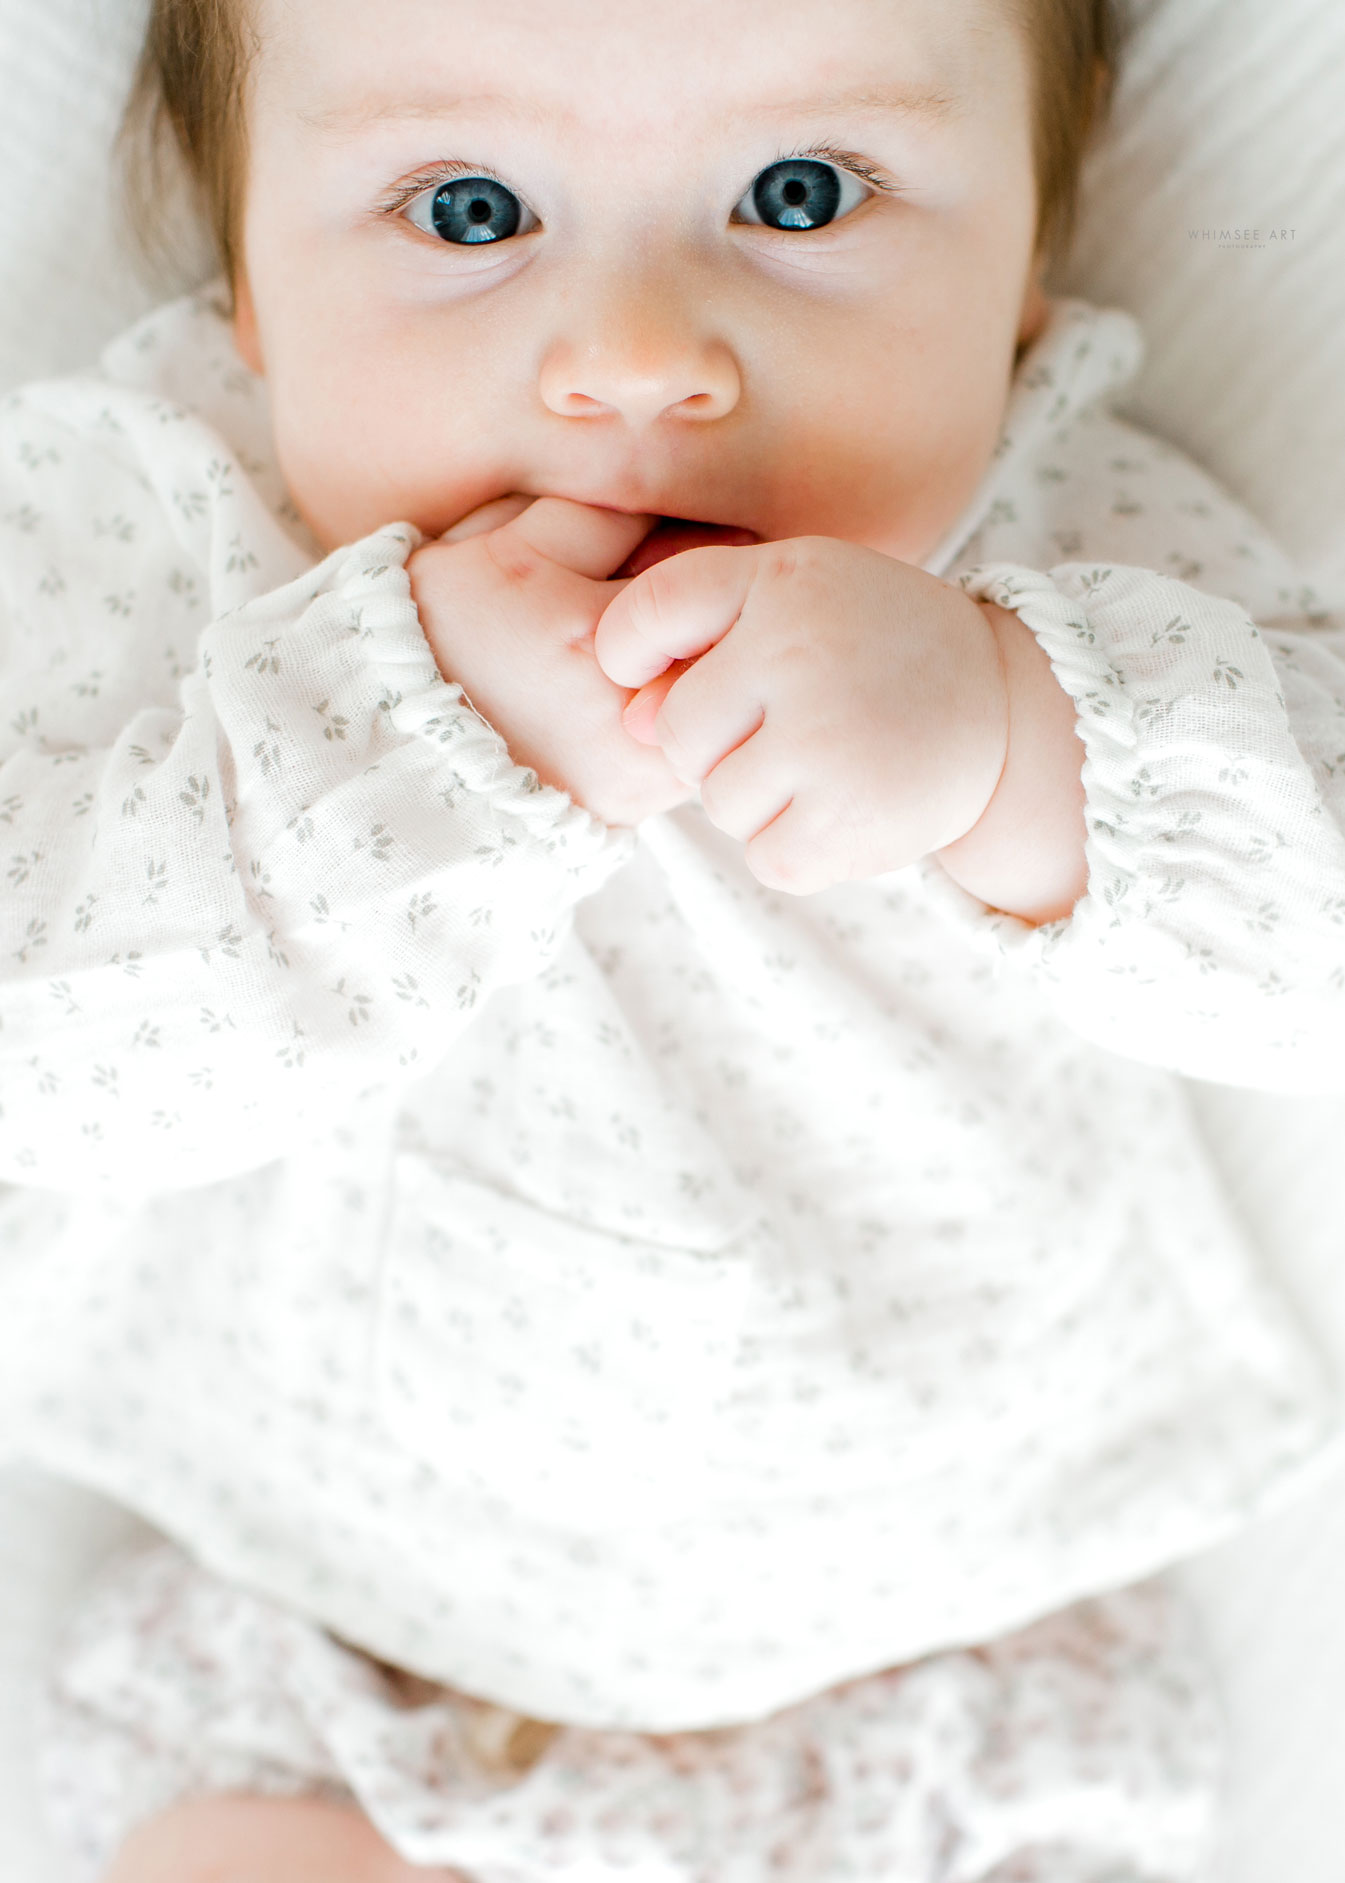 3 Month Studio Session | Roanoke Baby Photographer | Whimsee Art Photography